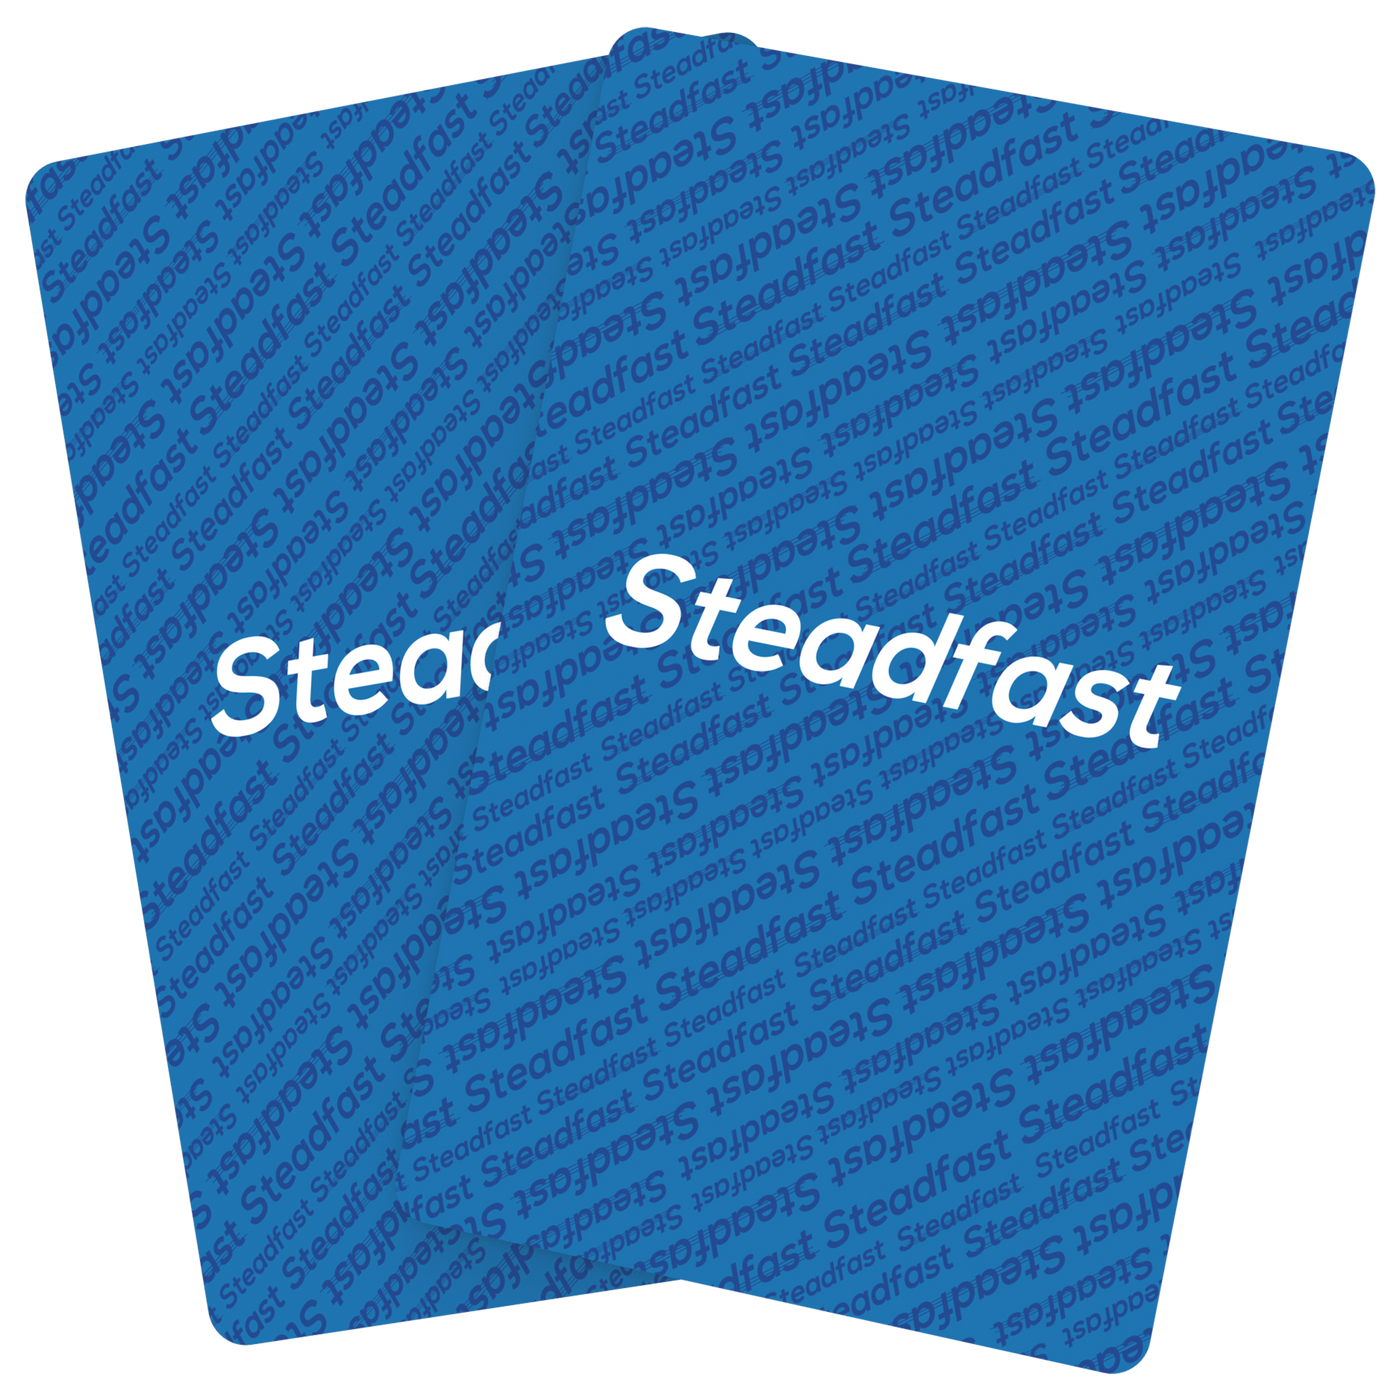 Steadfast X Playing Cards